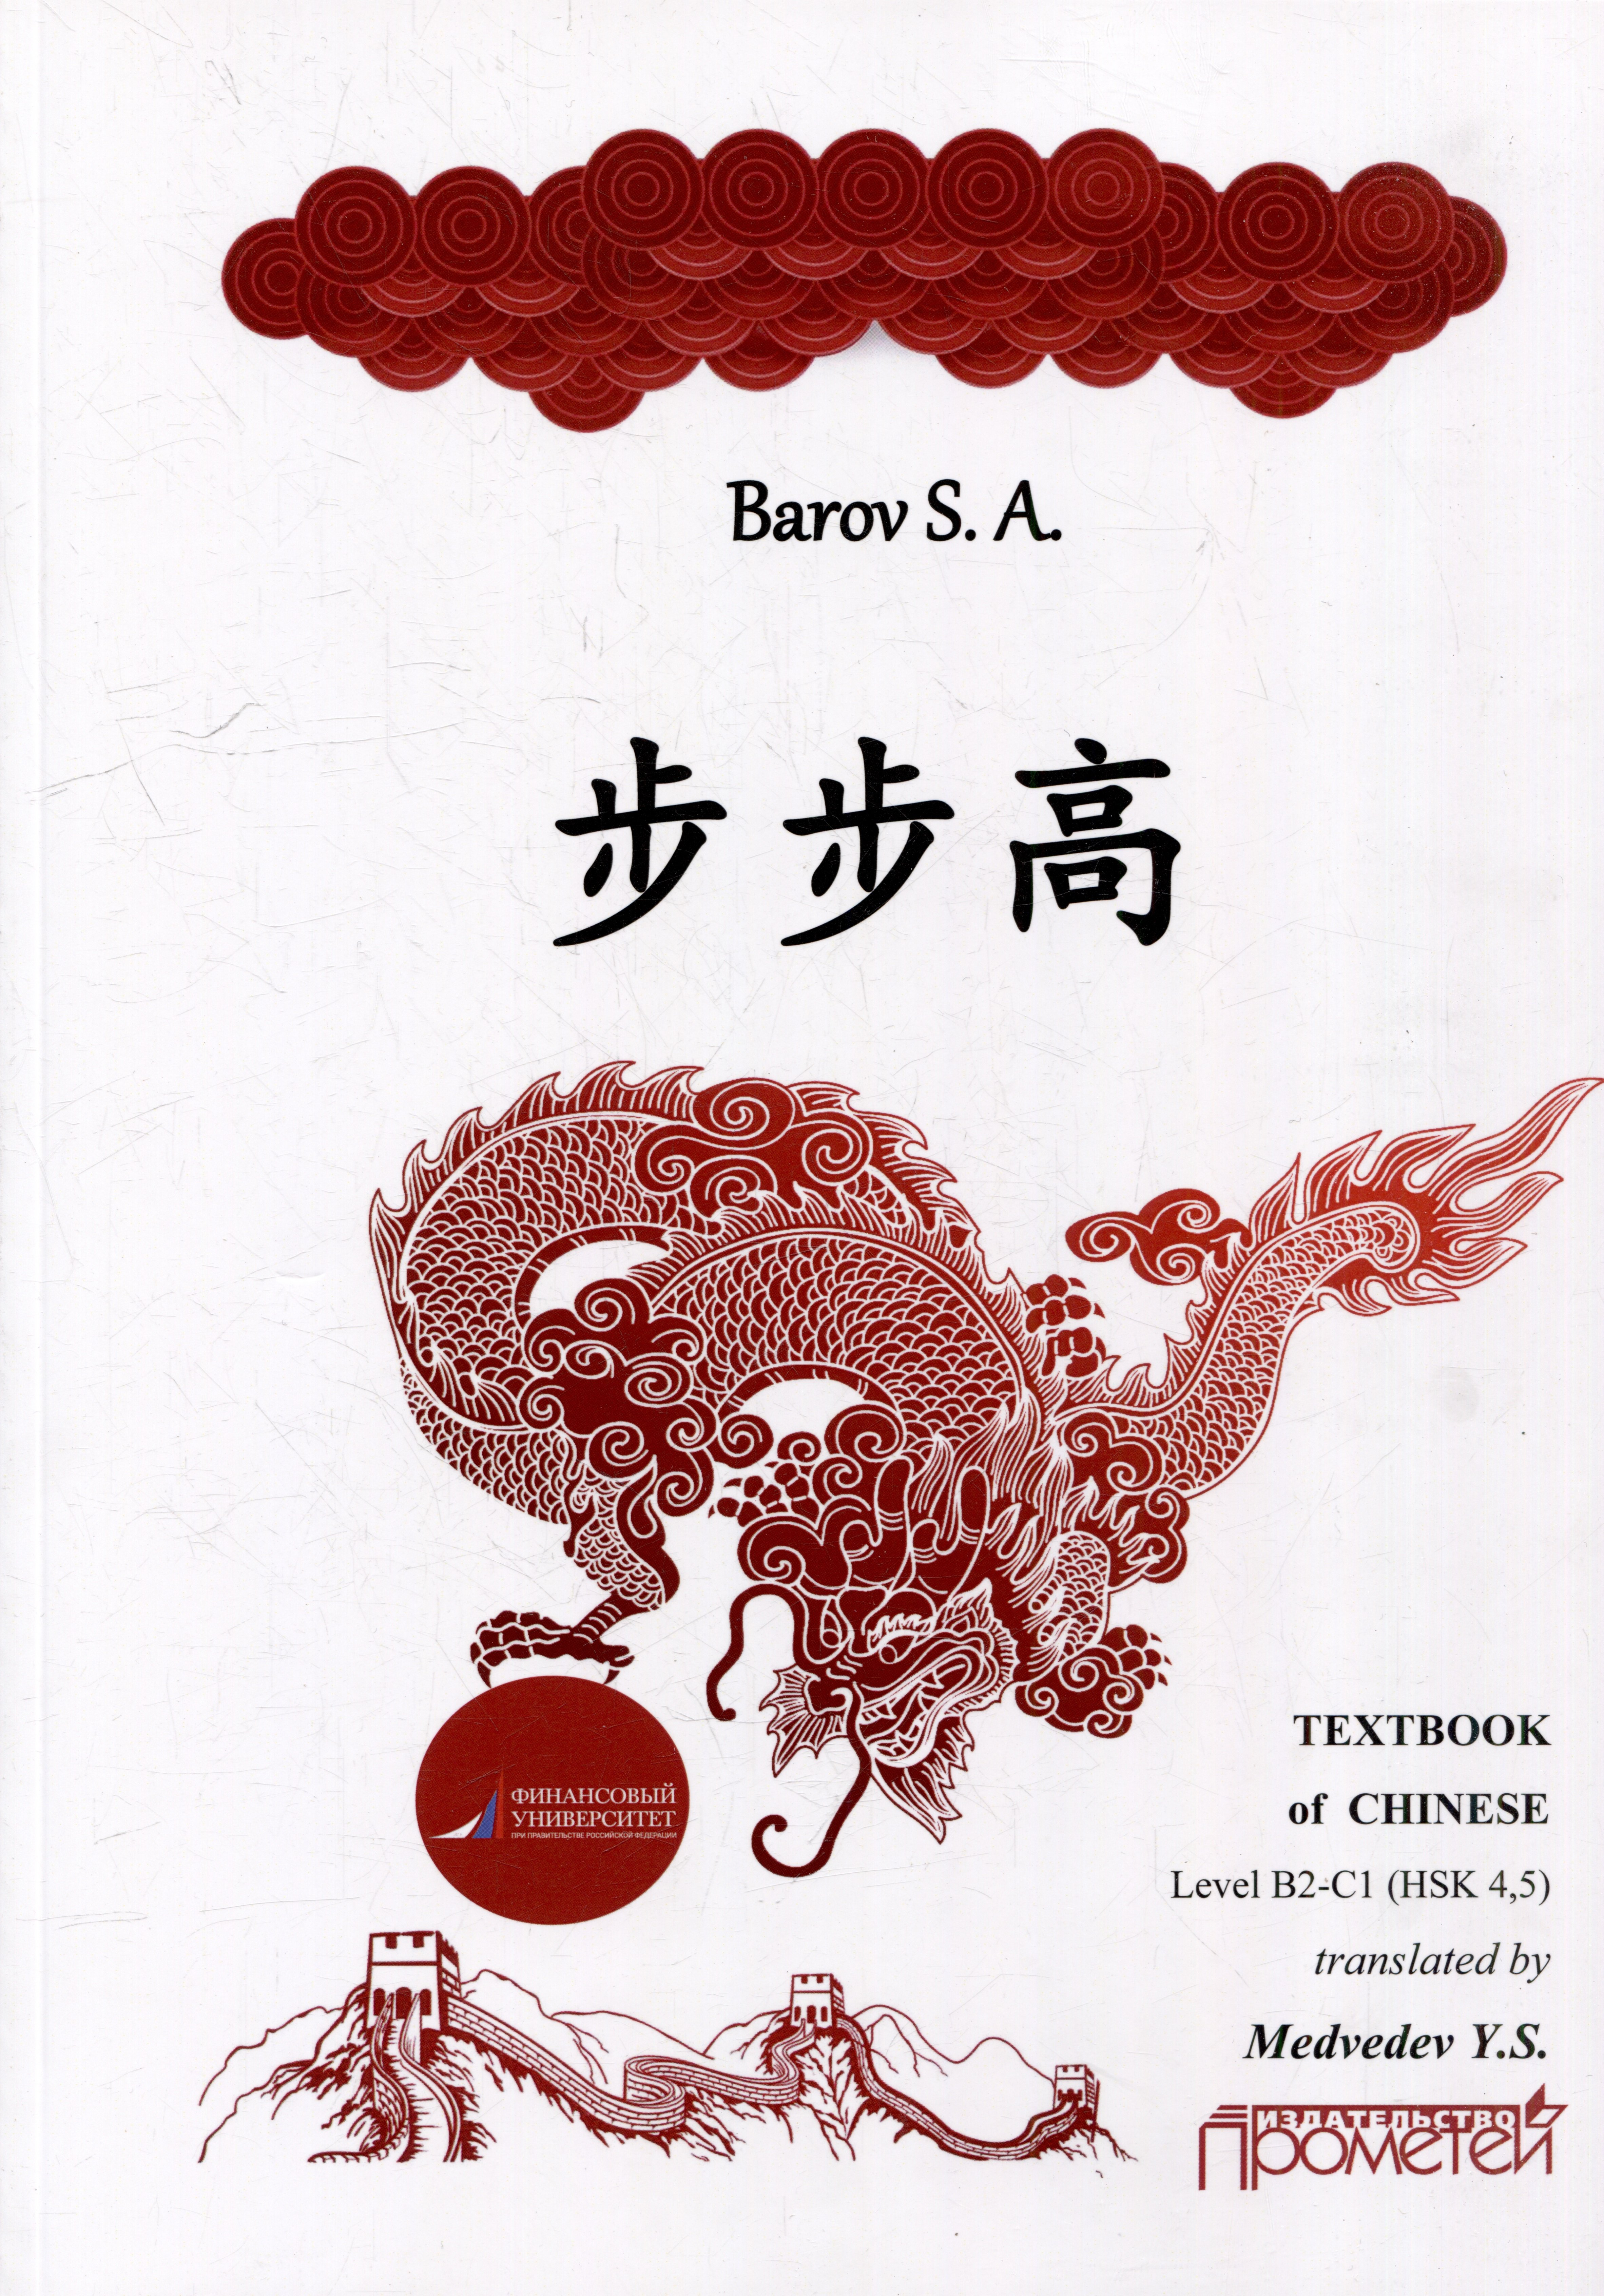 Textbook of Chinese ( RISING STEP BY STEP ) Level 2-1 (HSK 4, 5)